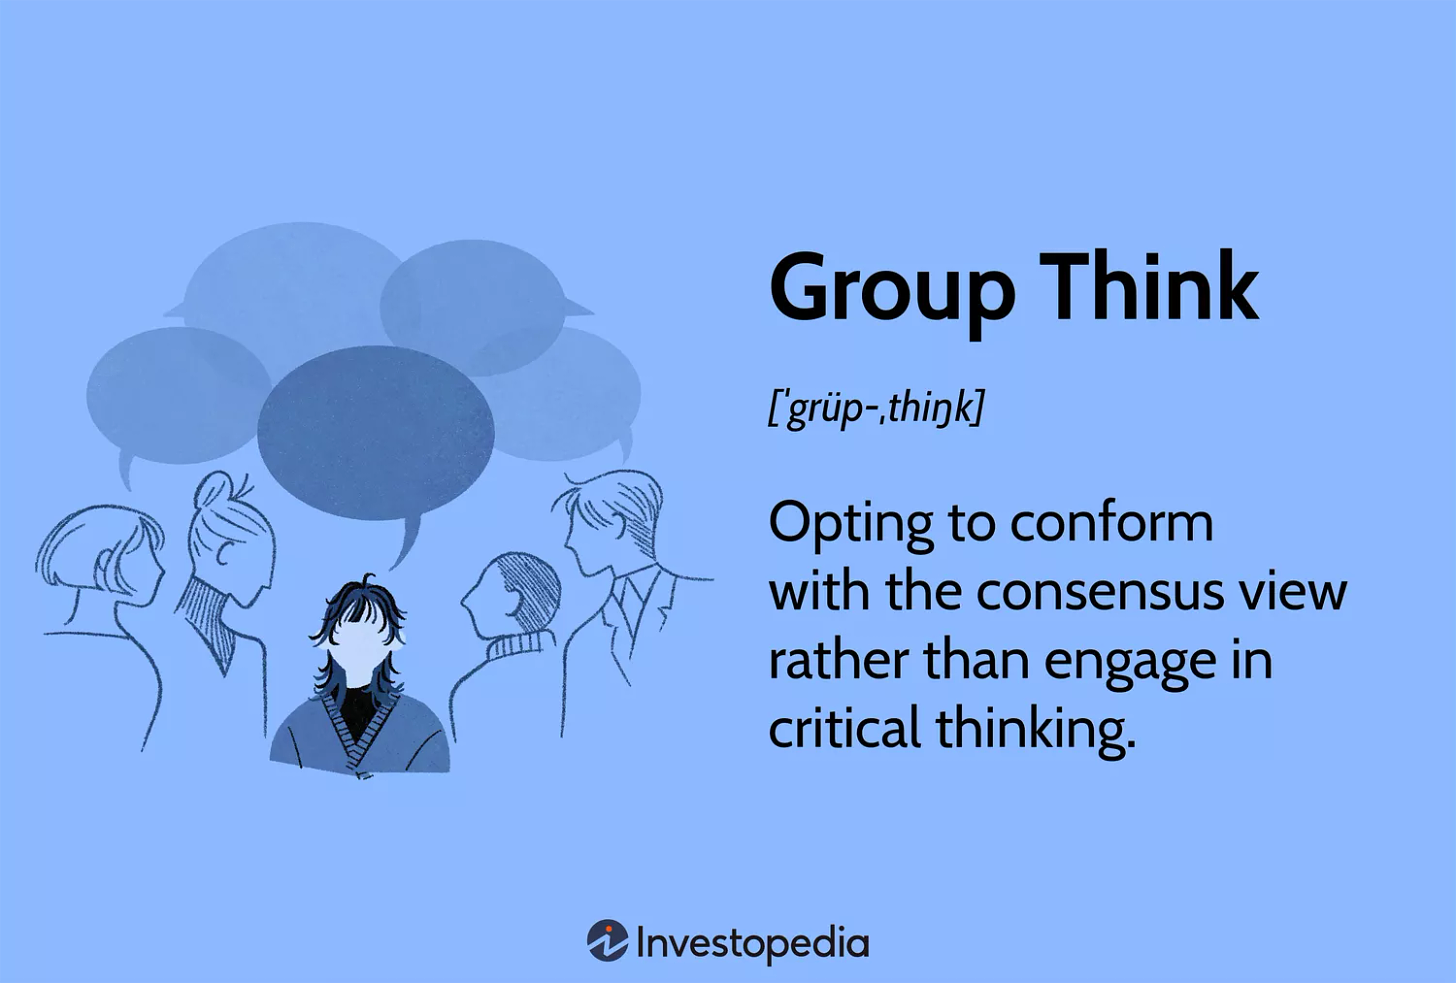 Groupthink: Opting to conform with the consensus view rather than engage in critical thinking.